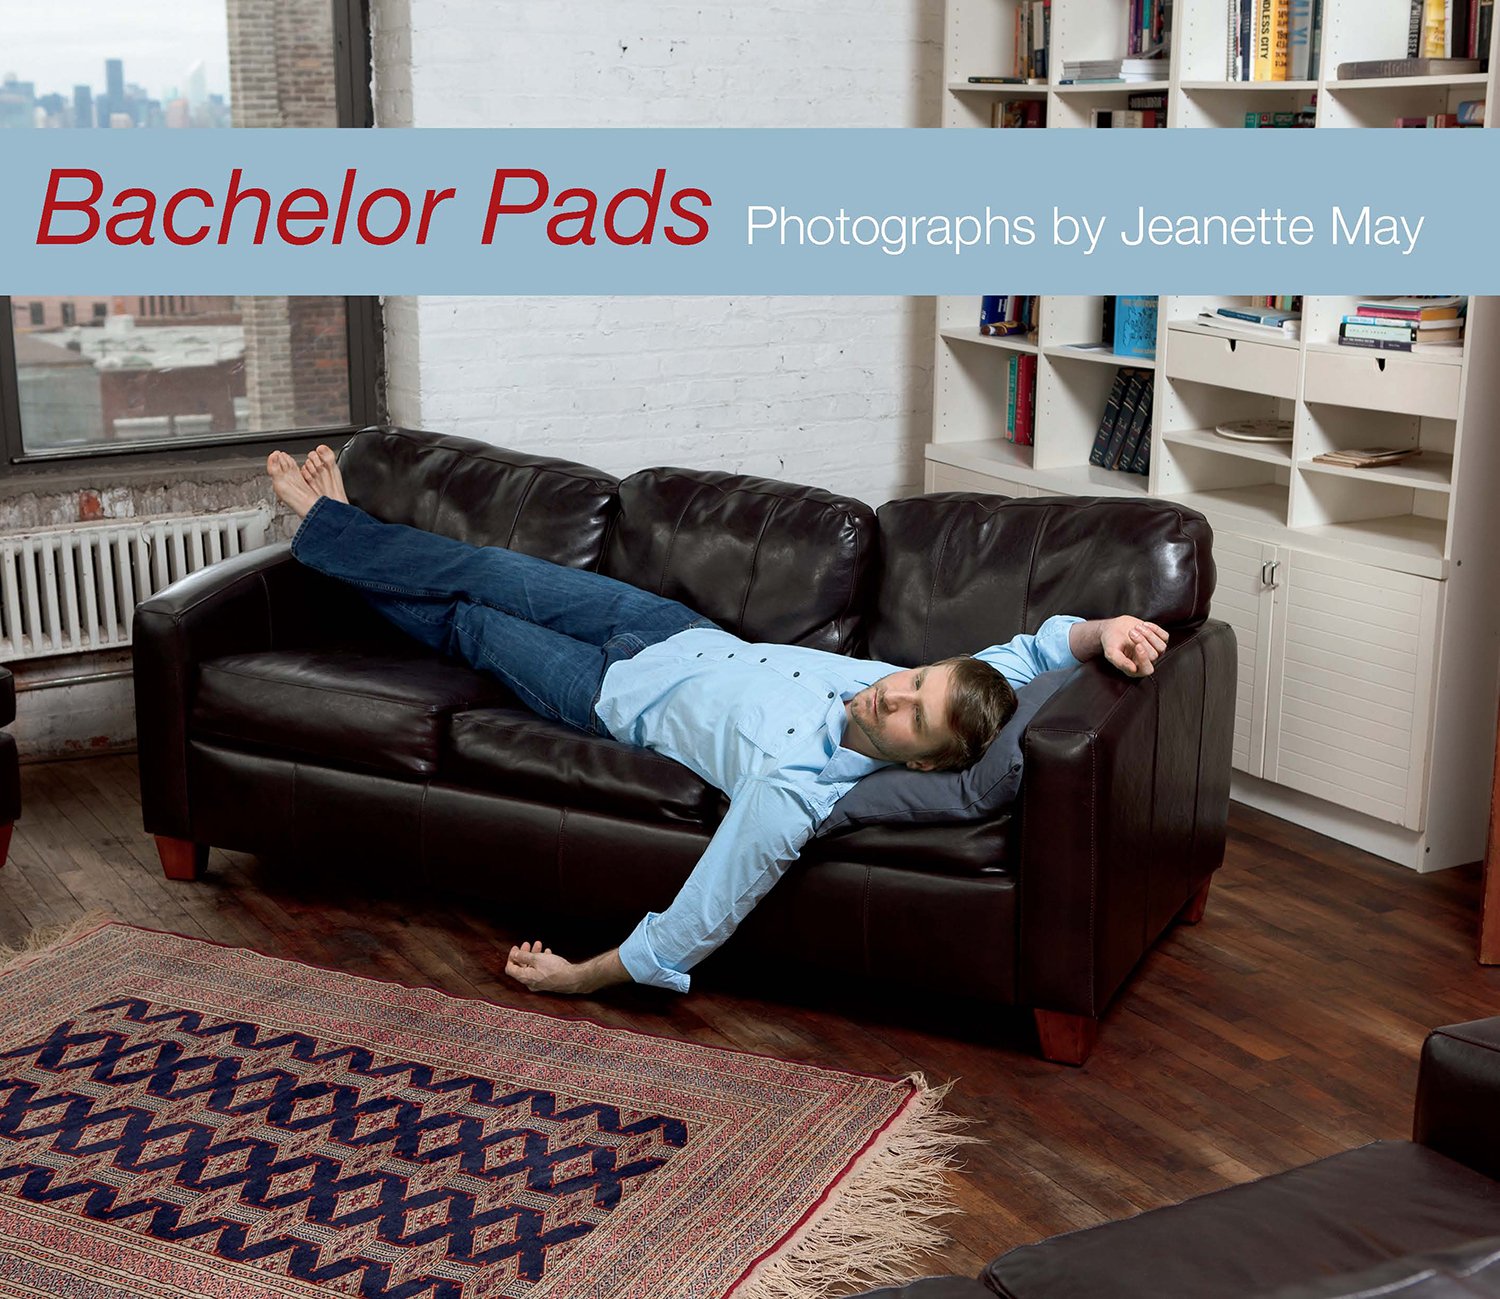 BachelorPads_front-cover-1500px.jpg